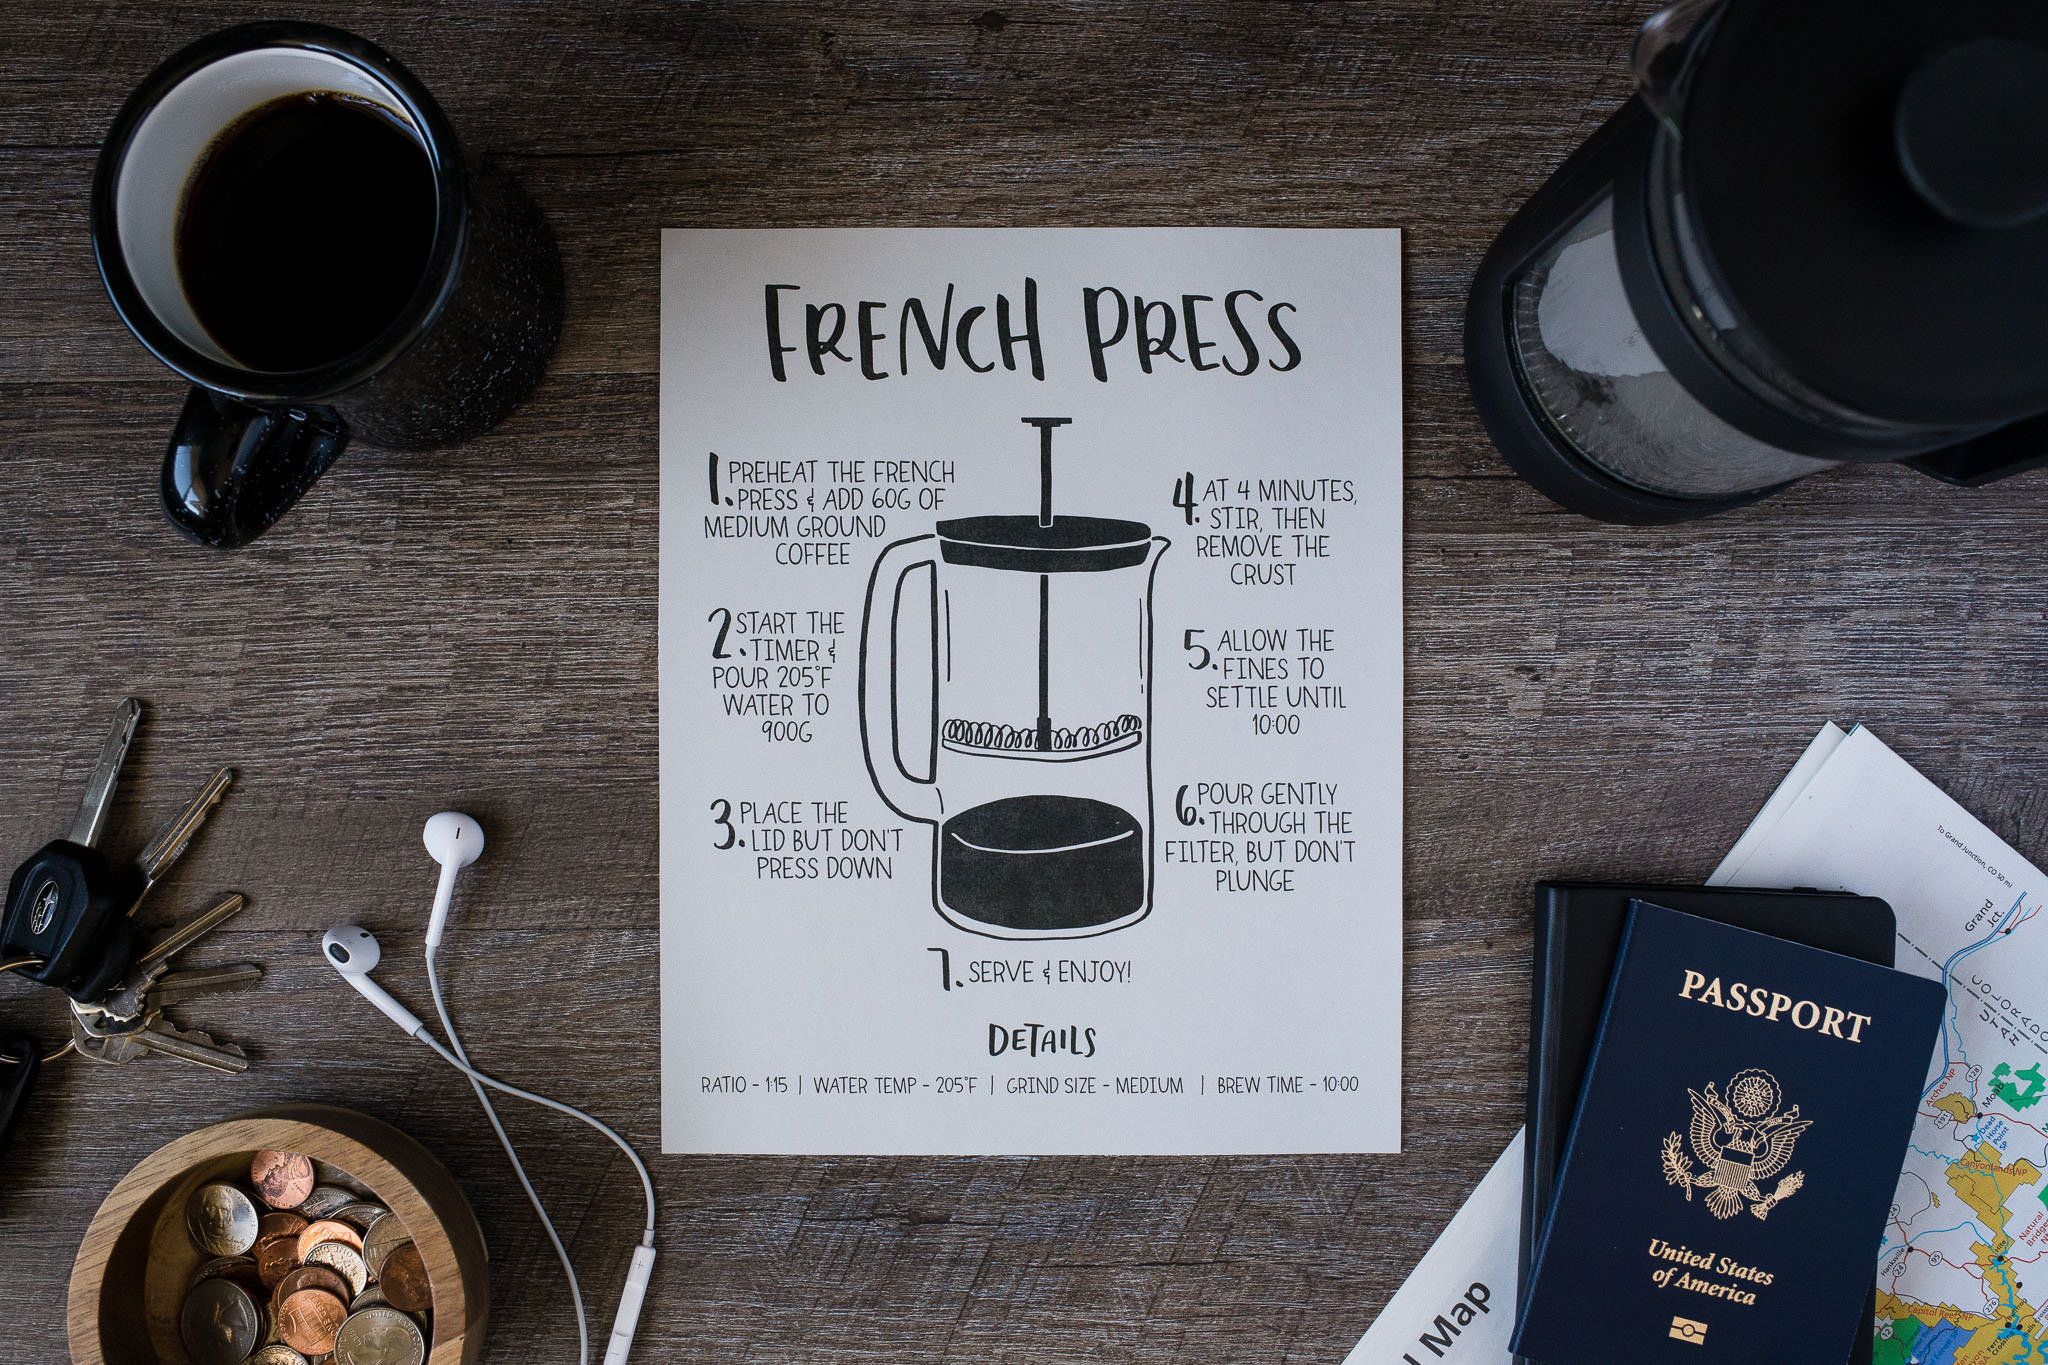 French Press coffee brewing guide poster